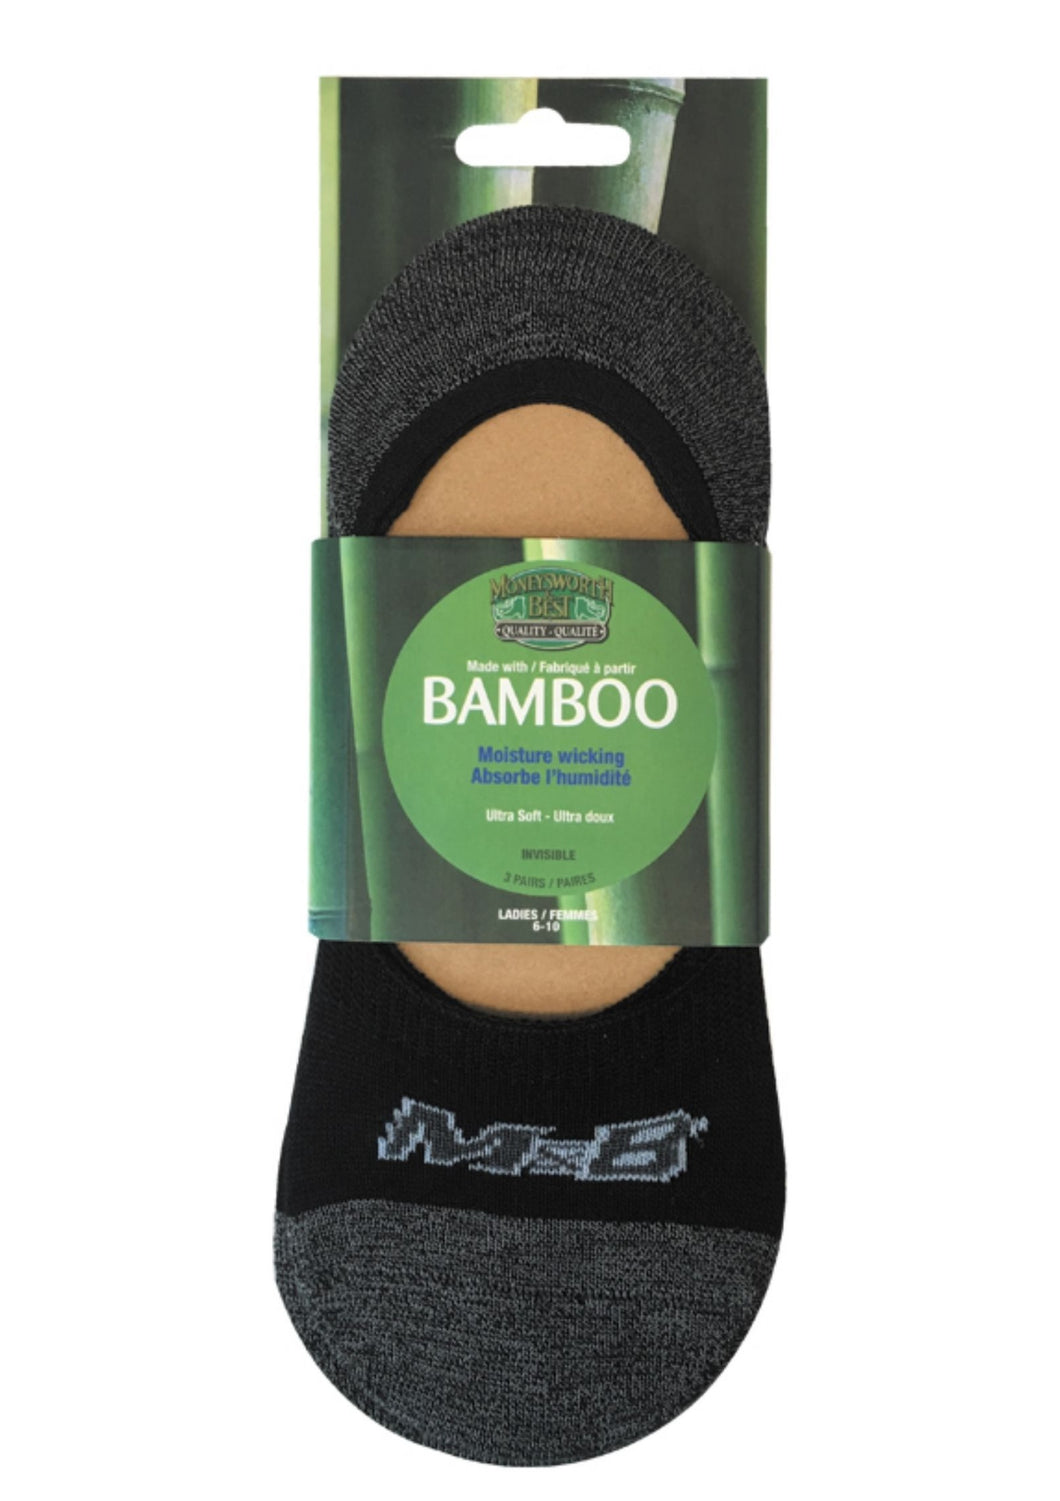 Bamboo socks are ultra soft and keep feet fresh and dry year round, cool in the summer and warm in the winter. Superior moisture absorption and breathable, antibacterial and non-allergenic.  Ultra low-cut design hides in most fashionable shoe styles. Features an anti-slip silicone strip above the heel for extra grip.  Fits Most (Women,s 6-10)  Fabrication Black: 80% Rayon from Bamboo, 17% Polyester, 3% Elasthanne Moneysworth & Best $10.00